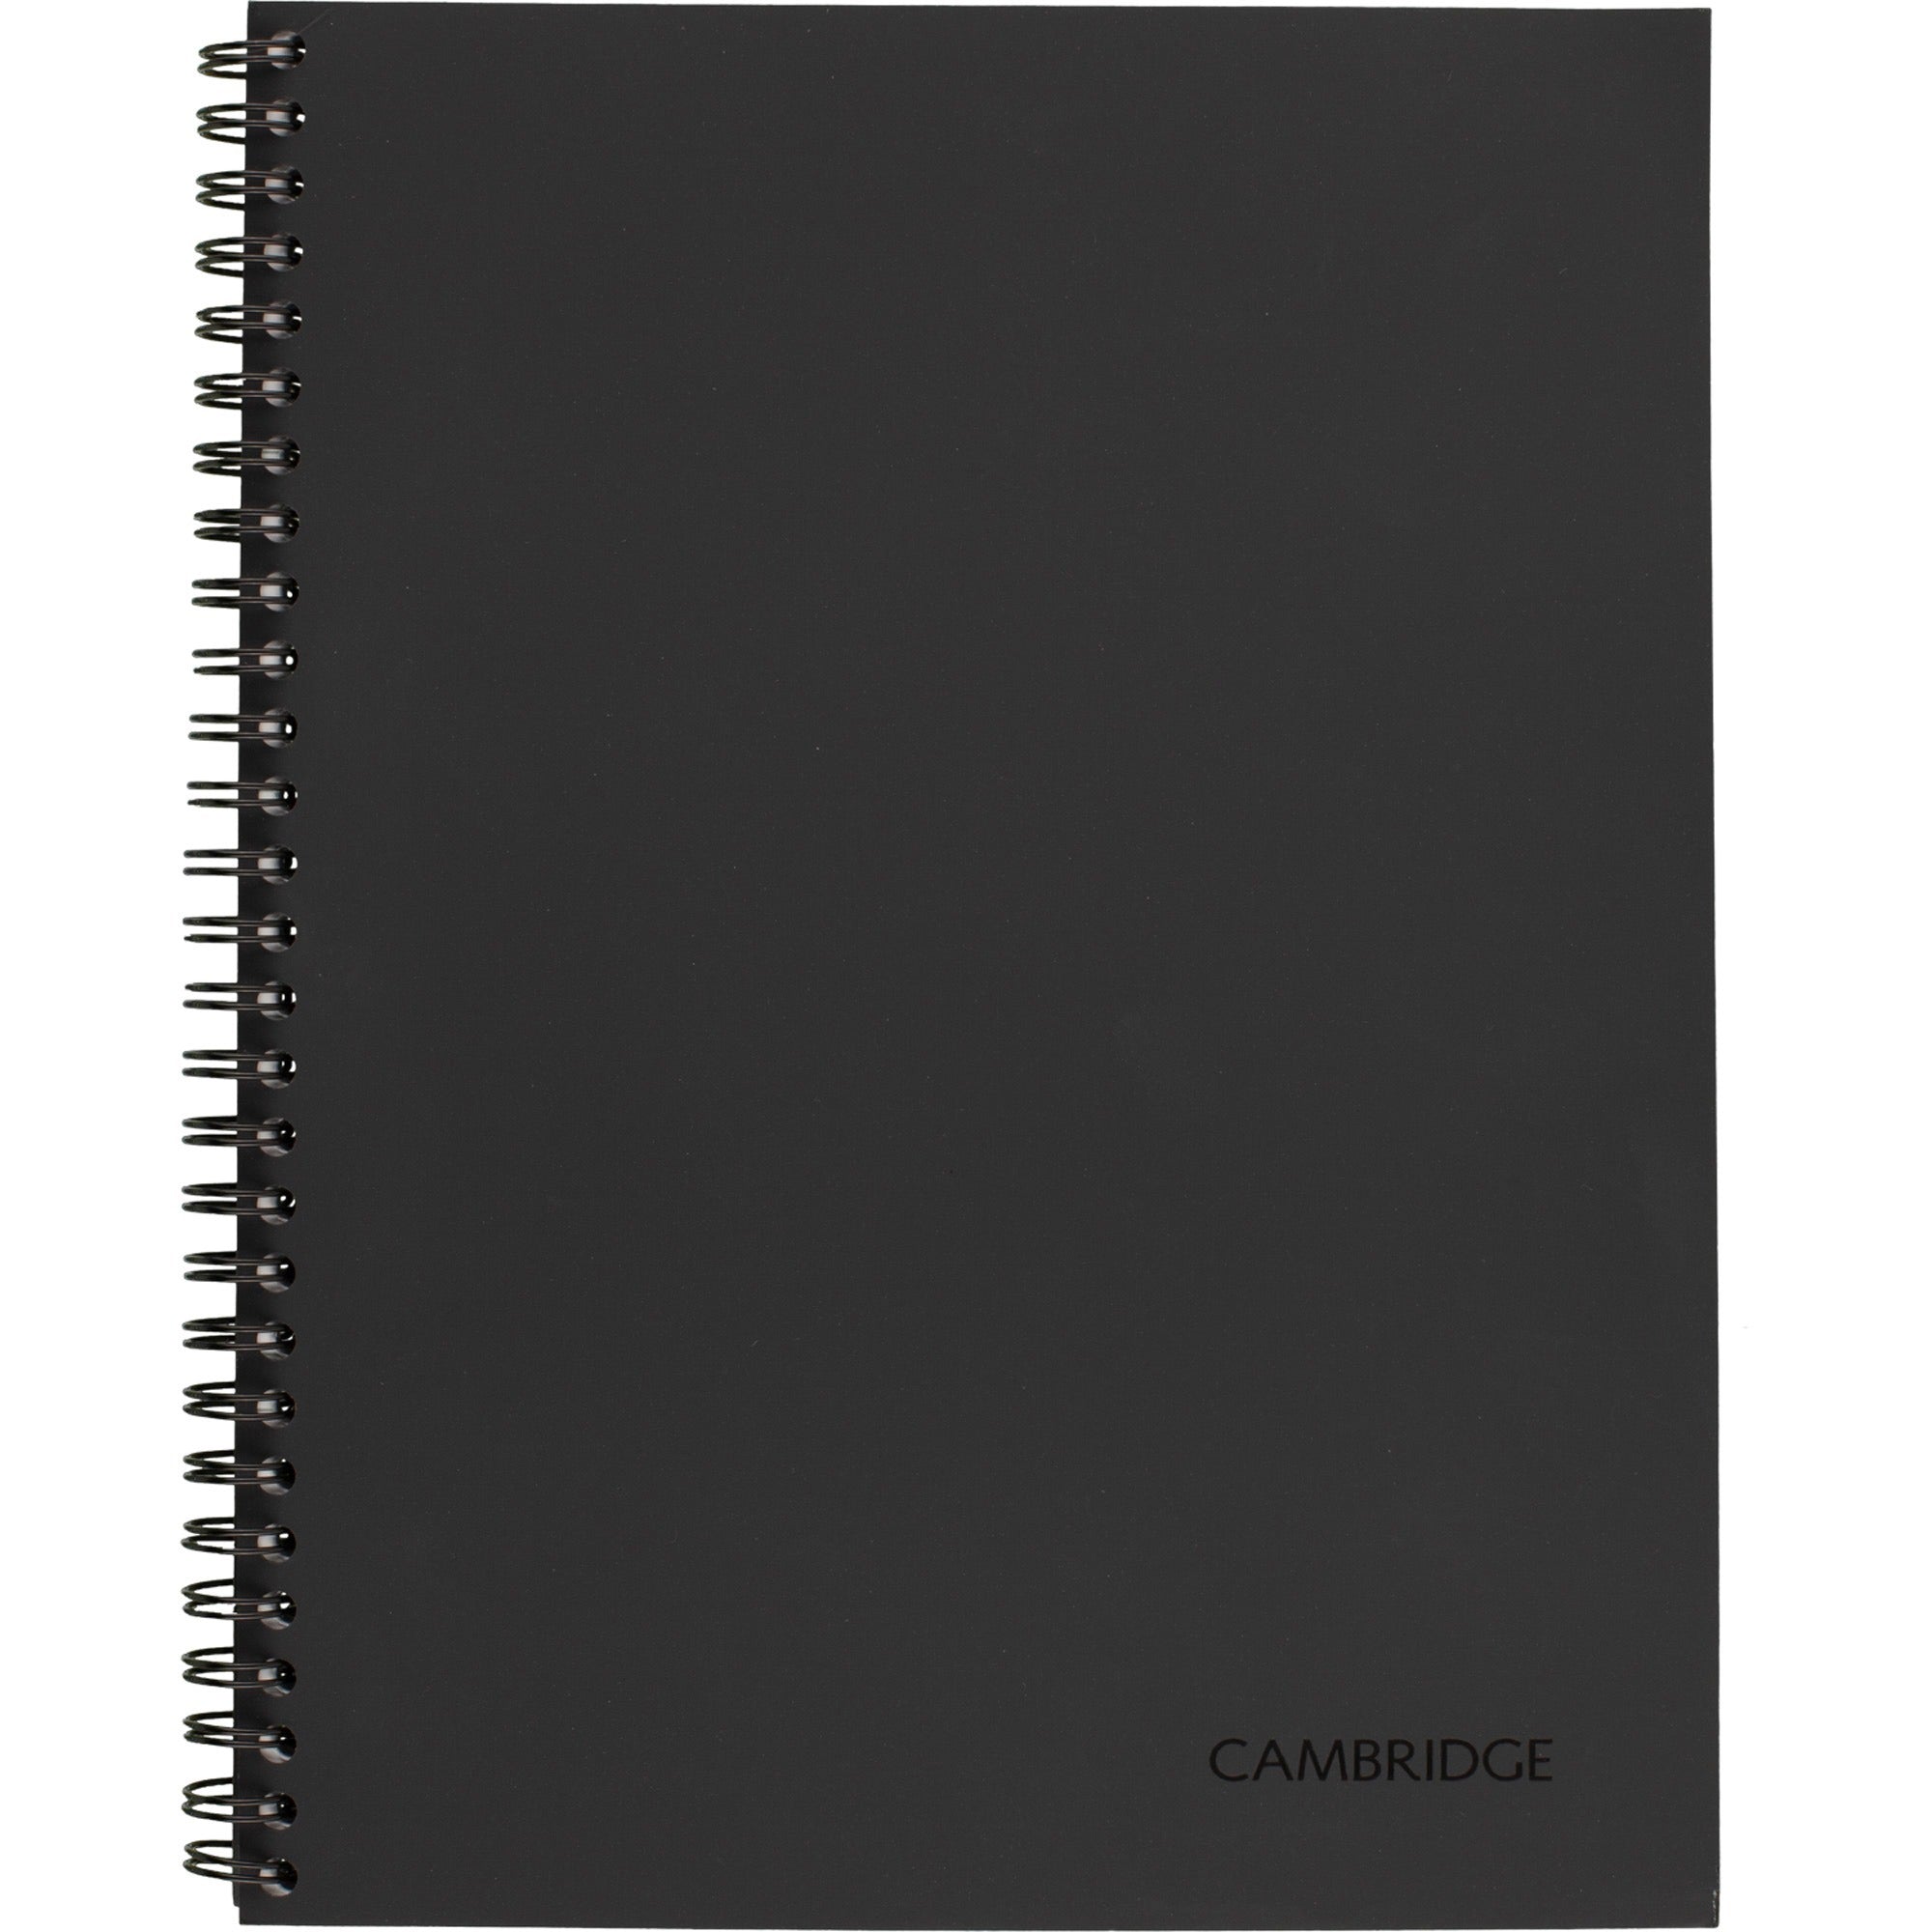 mead-limited-meeting-notebook-80-pages-wire-bound-both-side-ruling-surface-ruled-7-1-4-x-9-1-2-black-cover-perforated-dual-sided-recycled-1-each_mea06982 - 1